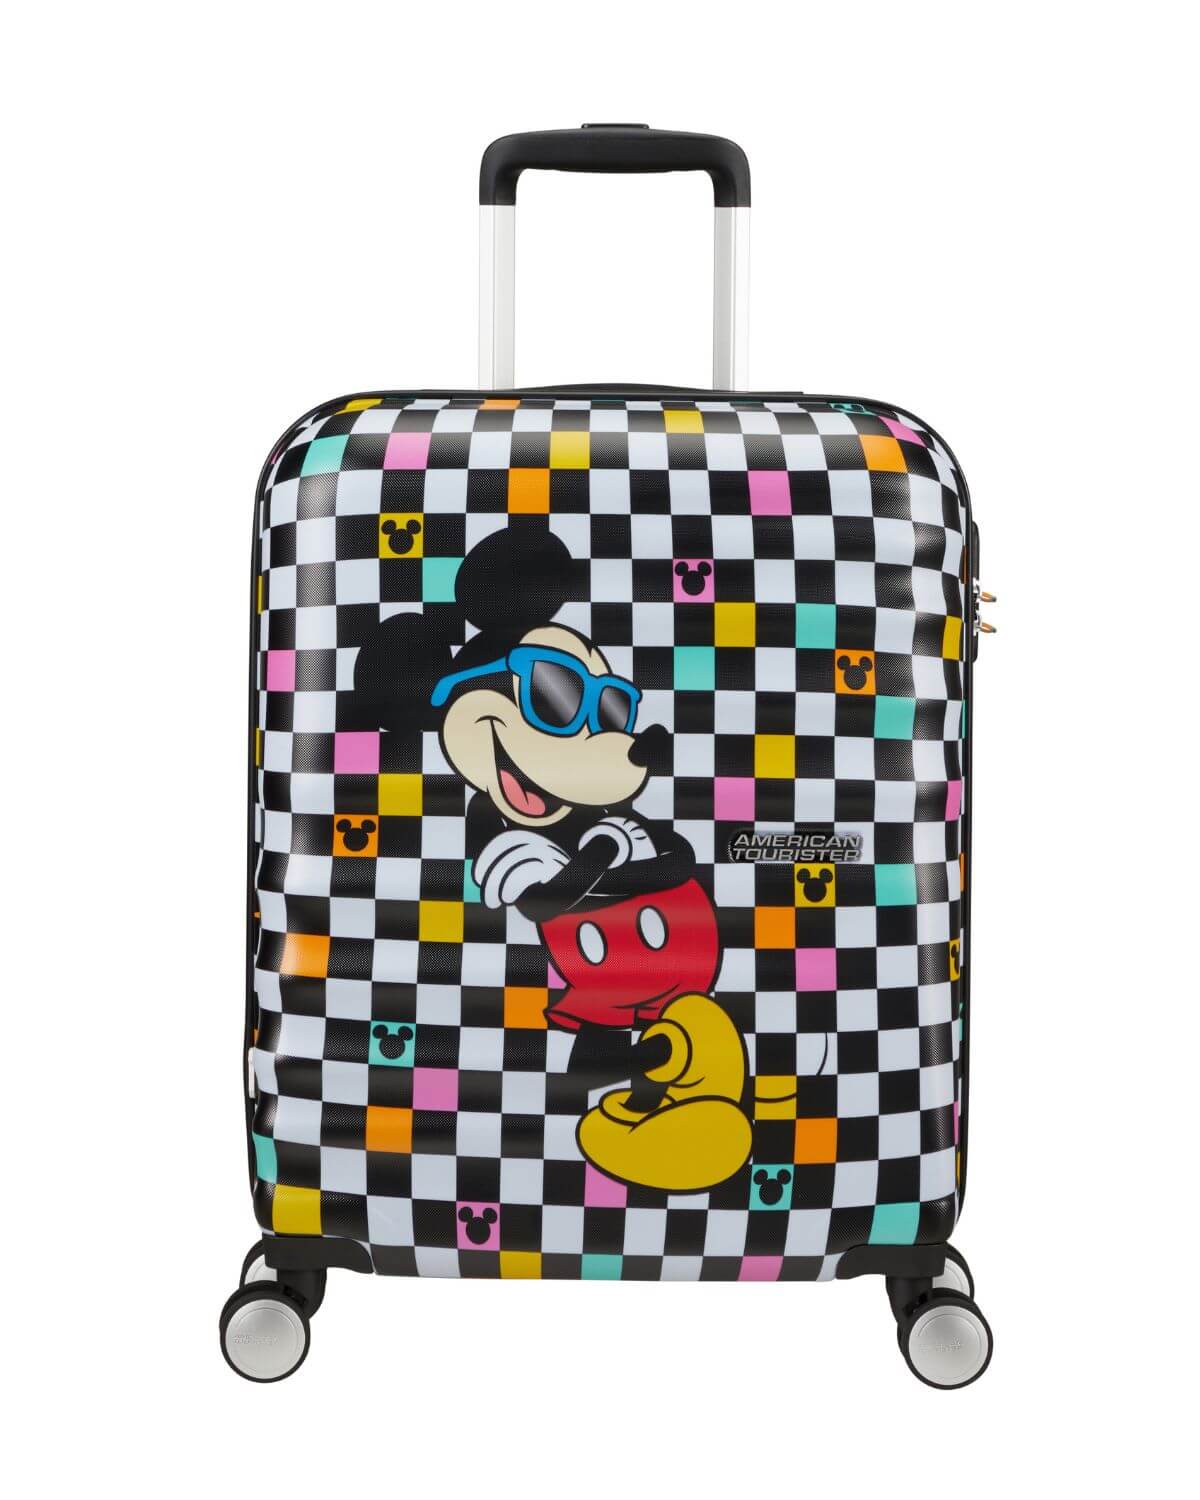 SPINNER AMERICAN TOURISTER MICKEY CHECK